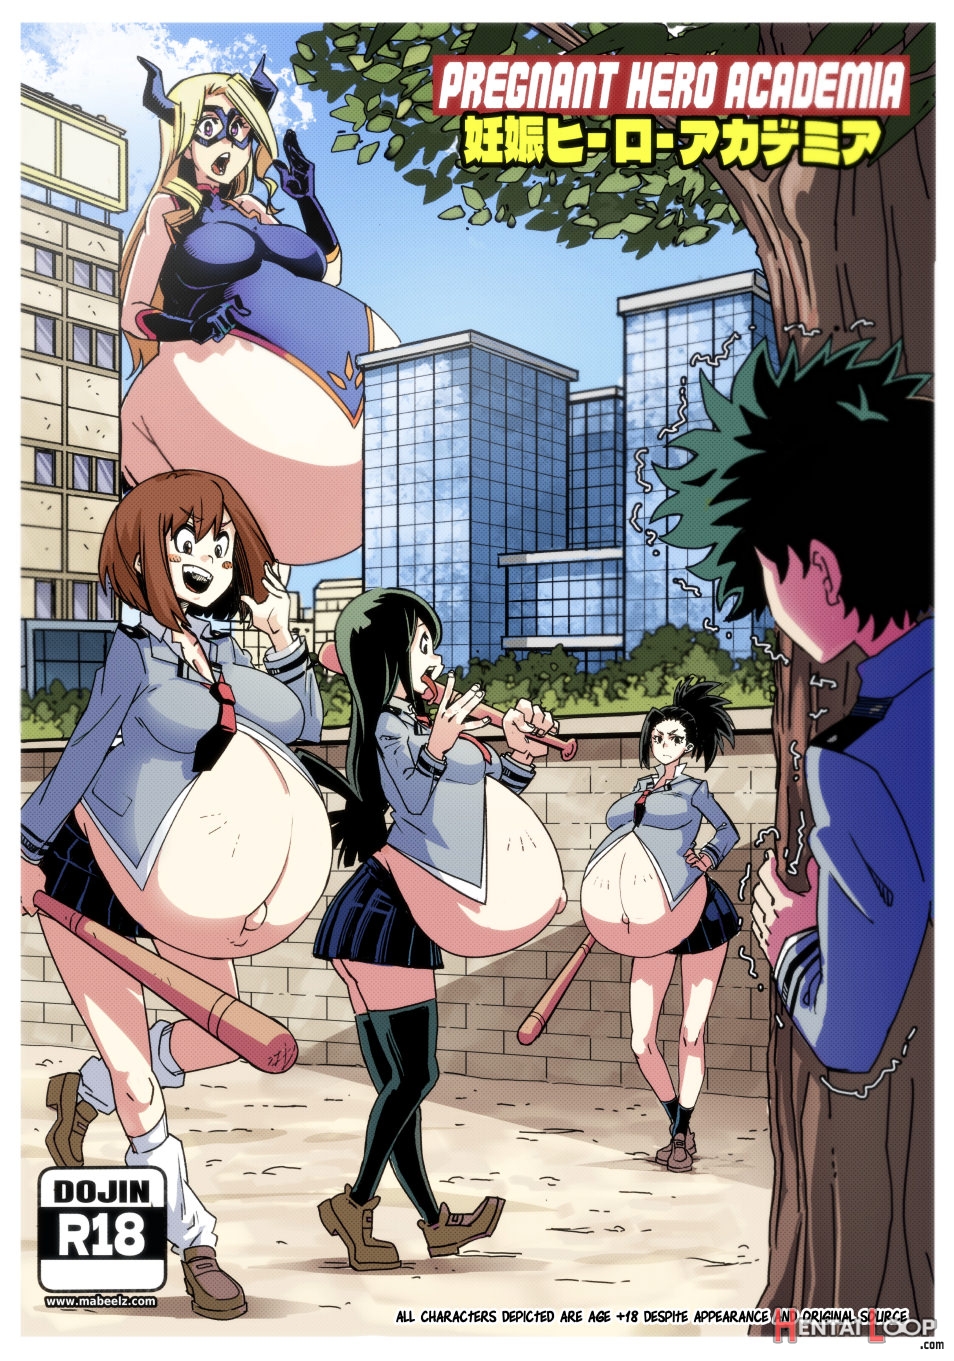 Pregnant Hentai Traps - Pregnant Hero Academia (by Mabee.lz) - Hentai doujinshi for free at  HentaiLoop